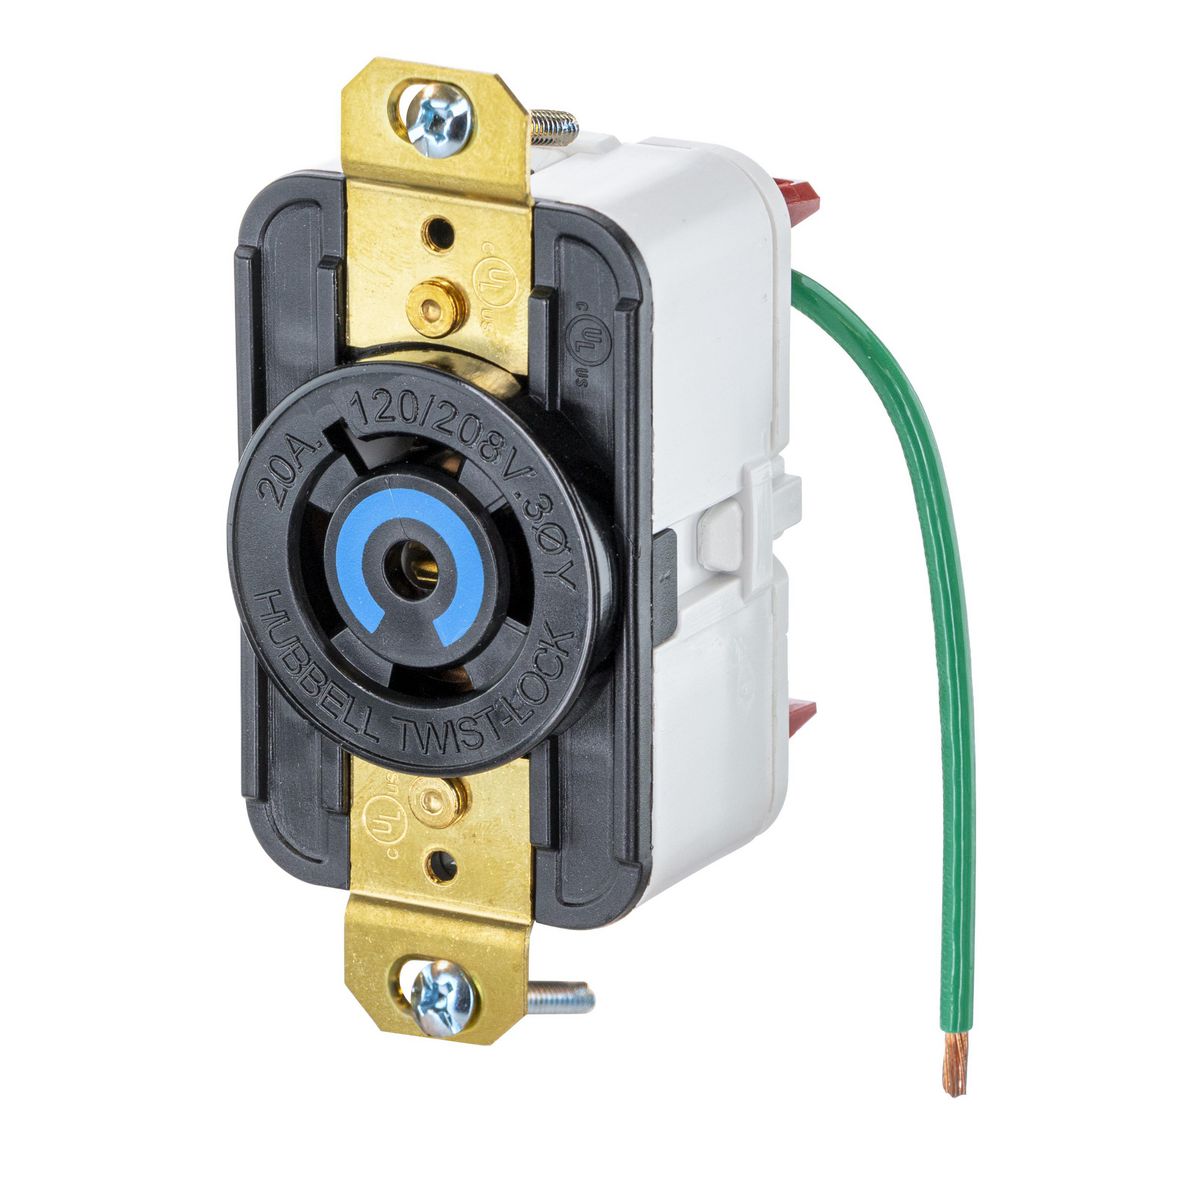 Hbl2510st Twist Lock® Edge Receptacle With Spring Termination 20a